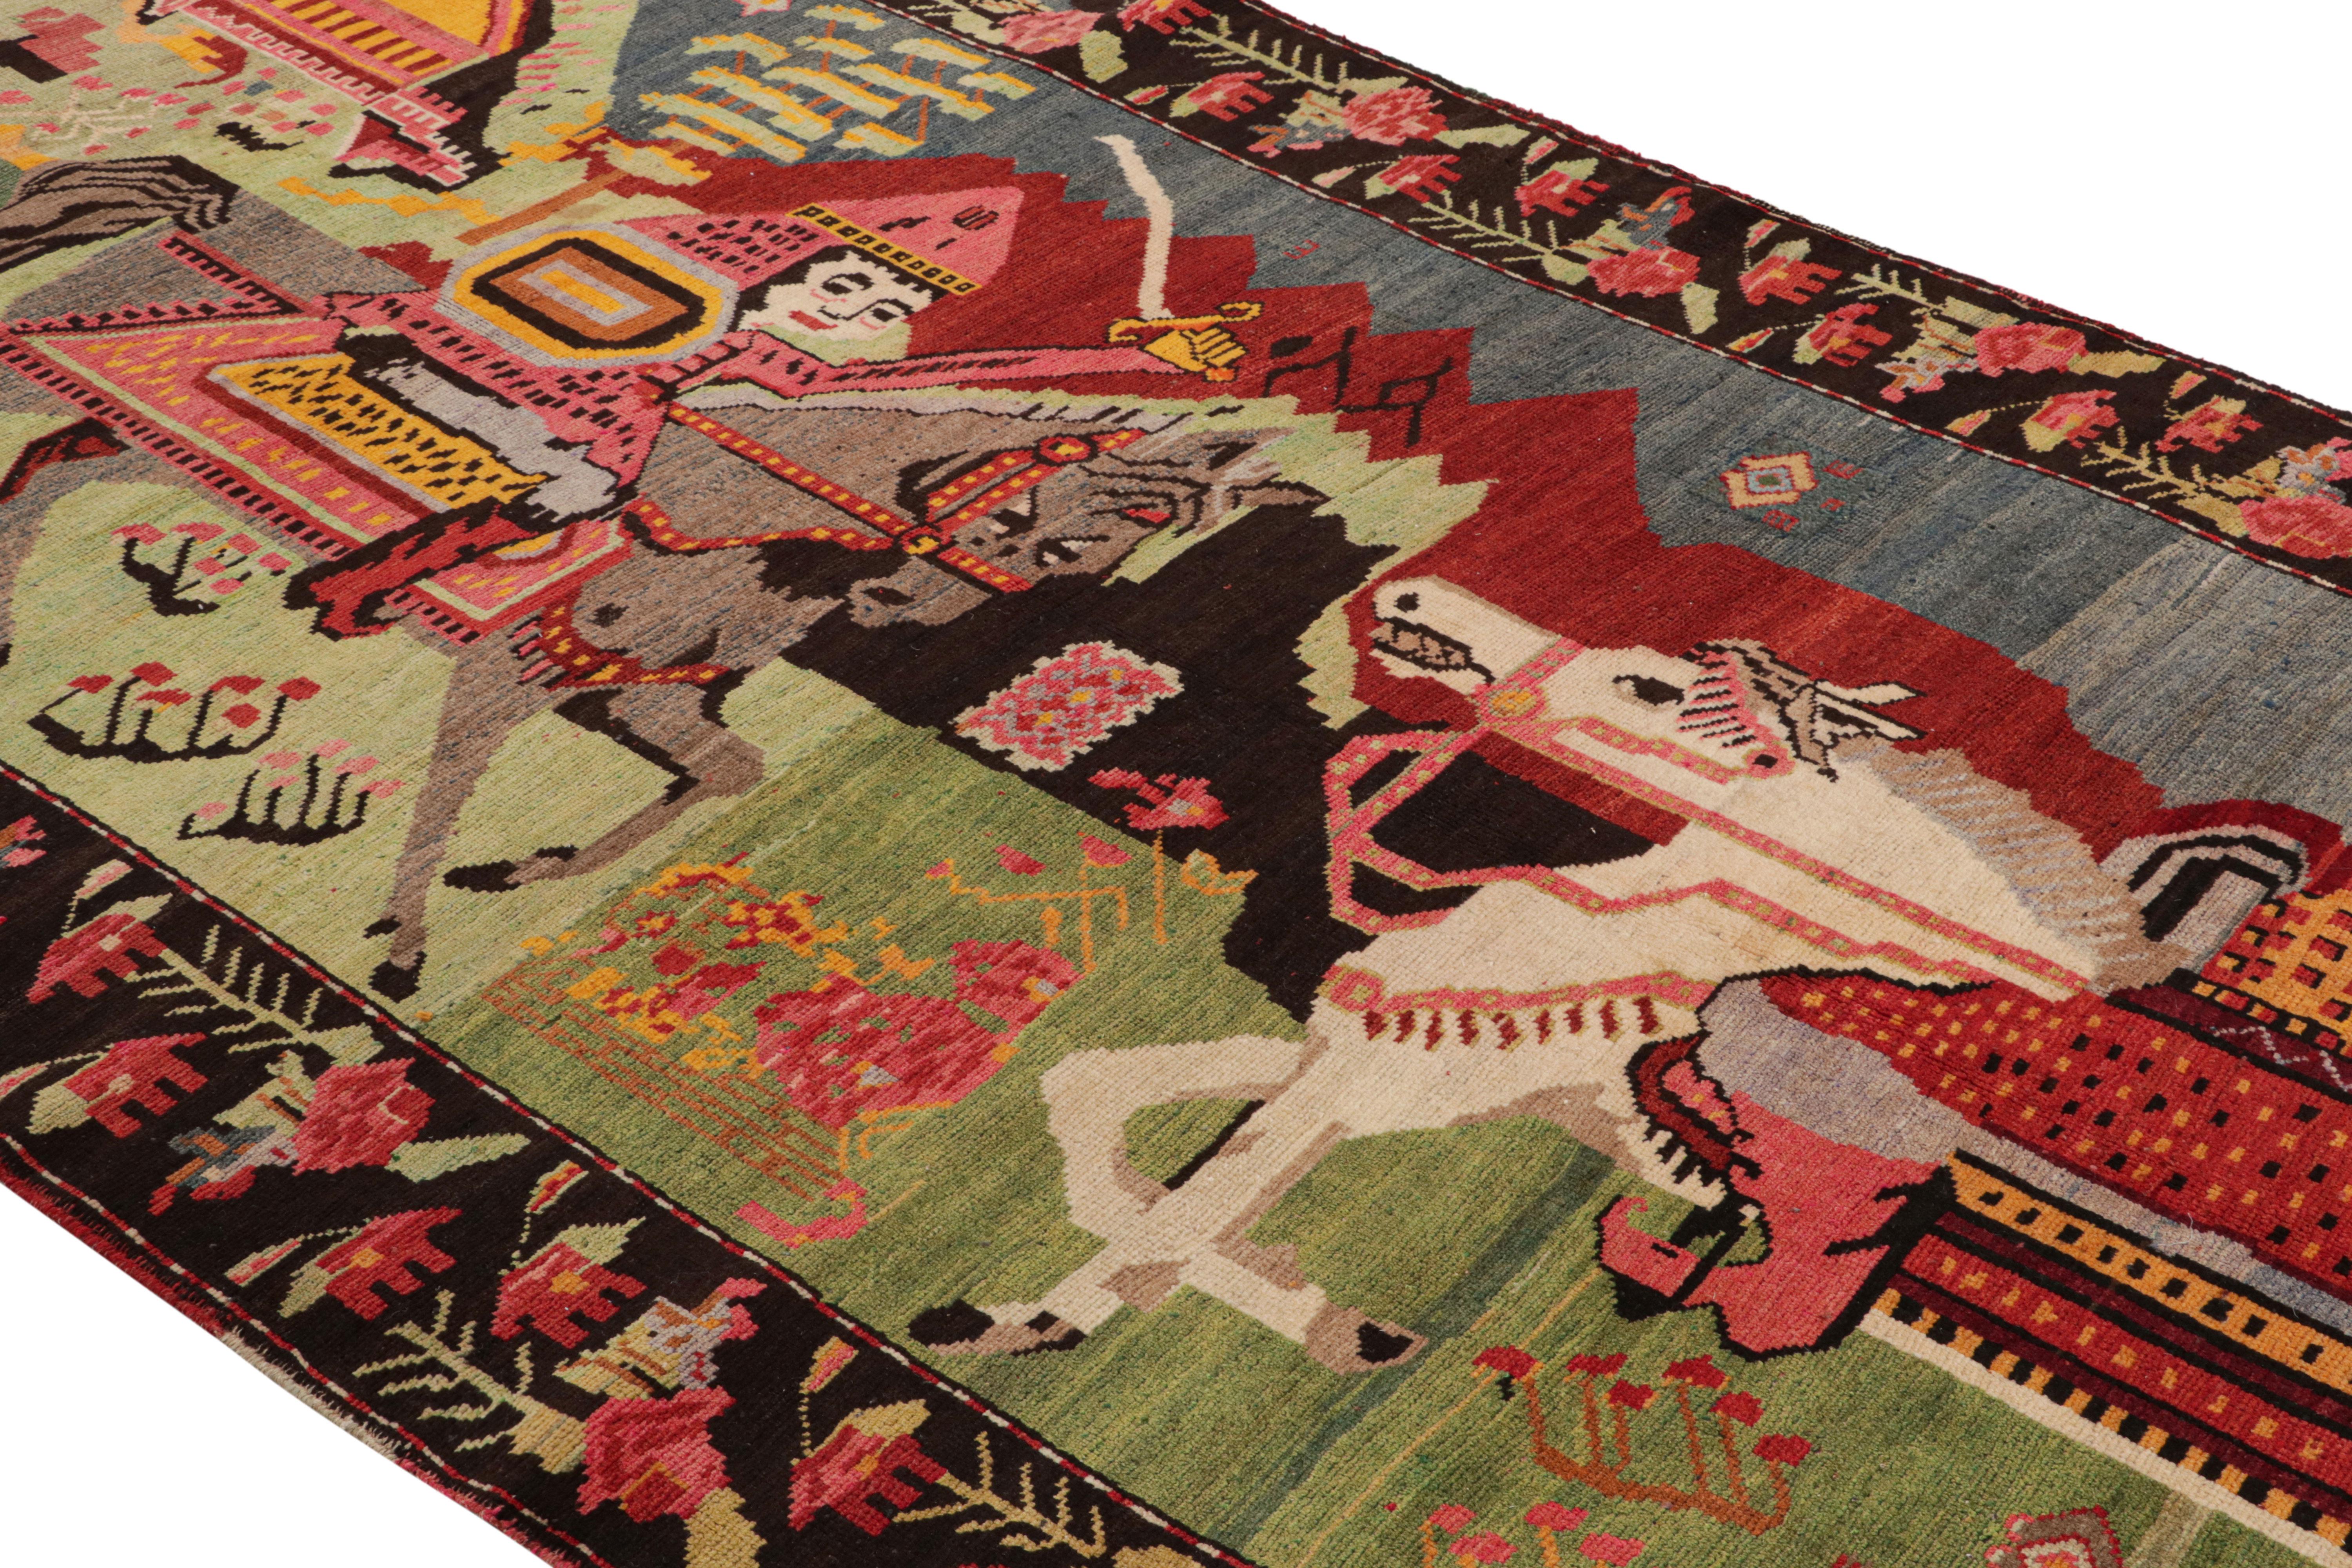 Hand knotted in wool originating from Turkey circa 1950-1960, this midcentury vintage pictorial rug enjoys a vivid marriage of colorway and uncommon pictorial pattern, depicting Classic riding warrior motifs on horseback against a lush village